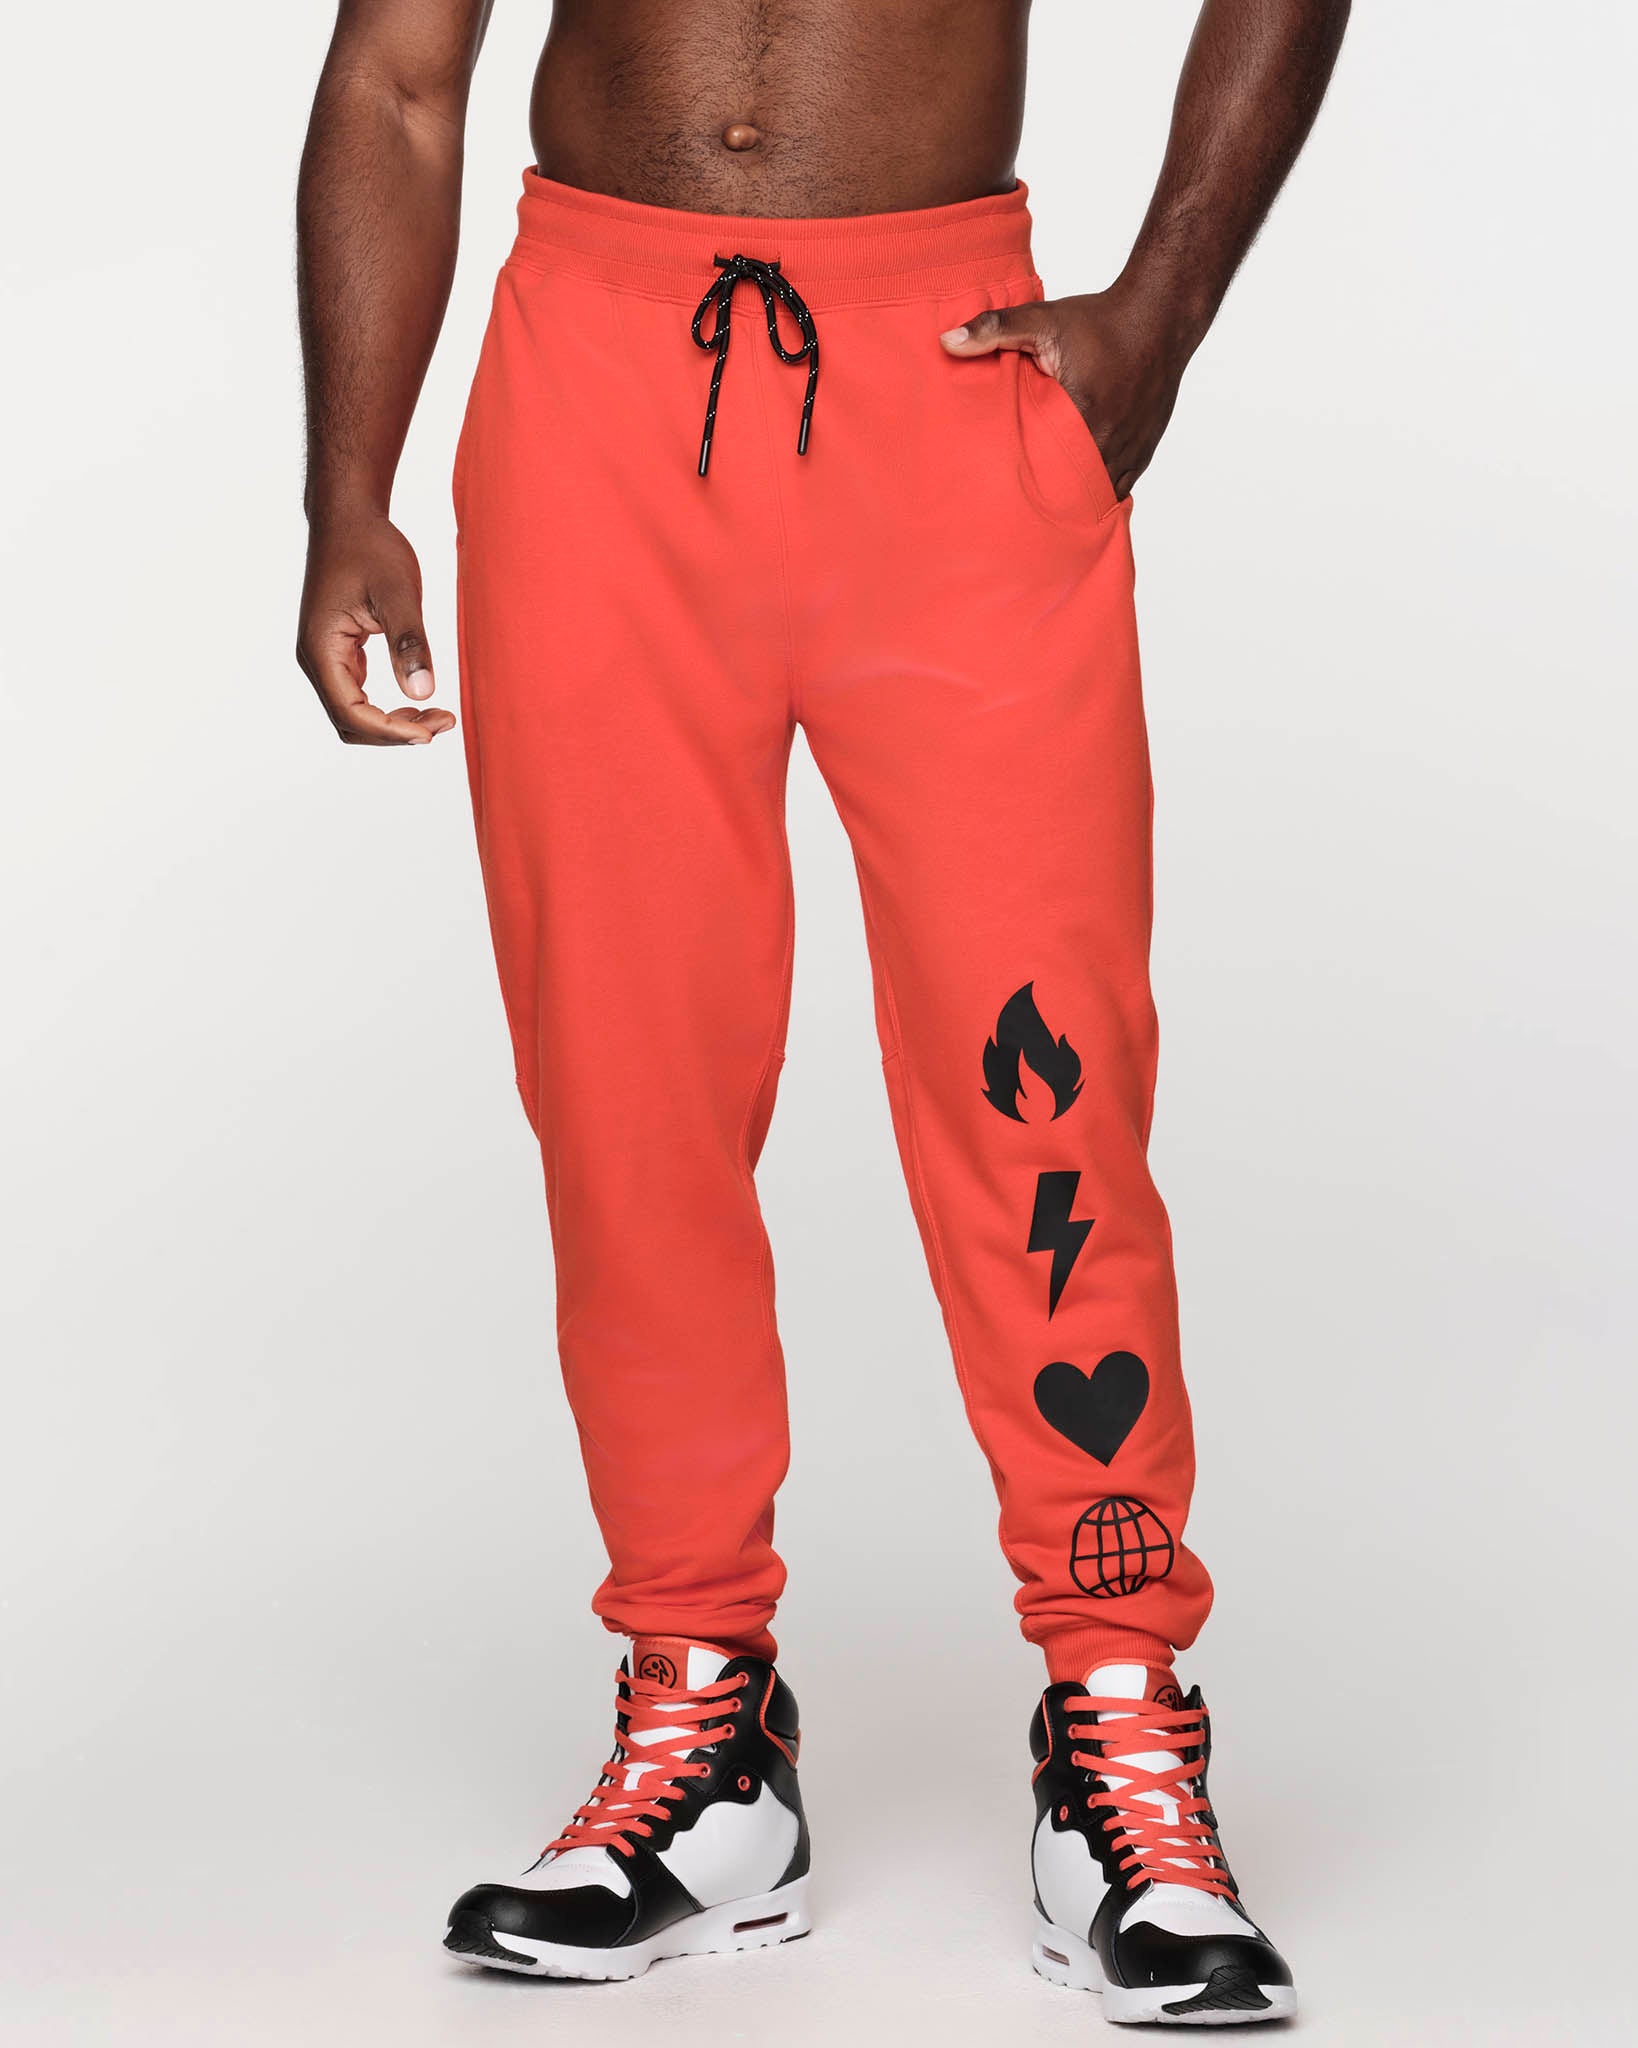 Jogger Hiphop Collection Pants Men and Women, zumba gym dance practice,  velvet, wide sporty form, soft, breathable. | Shopee Philippines